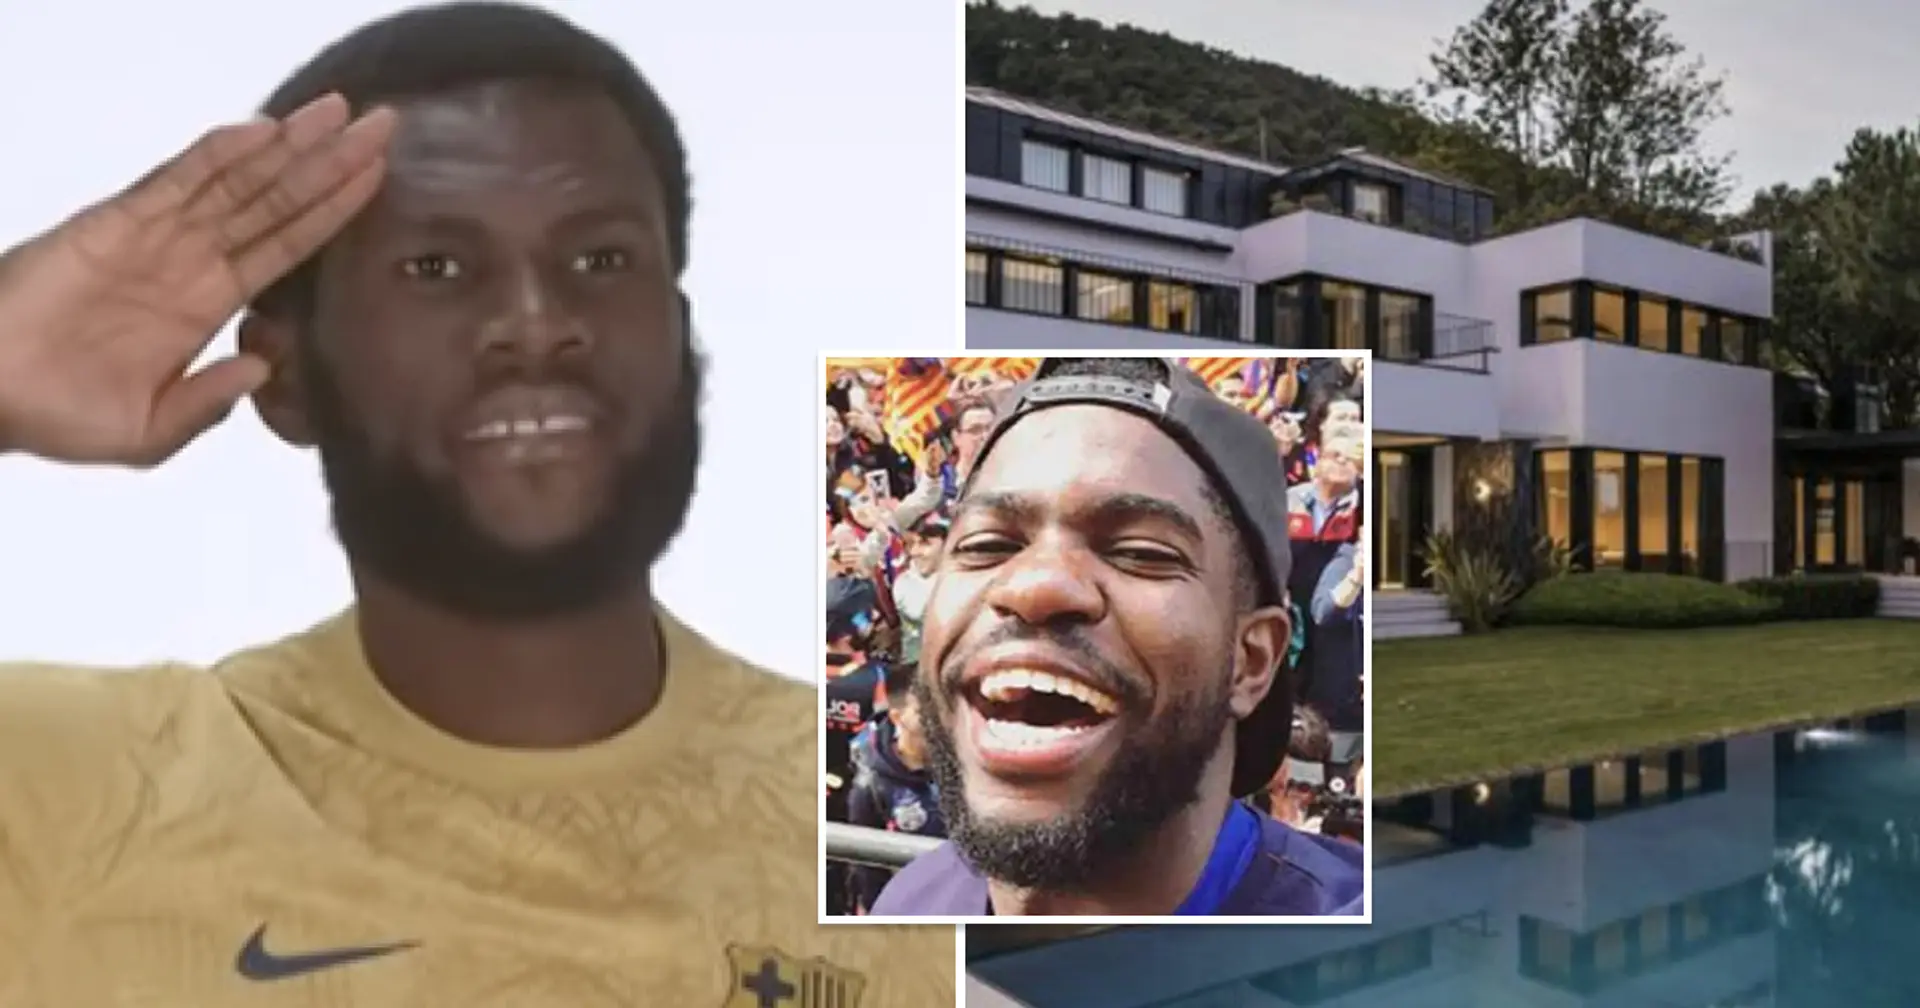 One time Samuel Umtiti helped Franck Kessie find a house  -- they barely knew each other